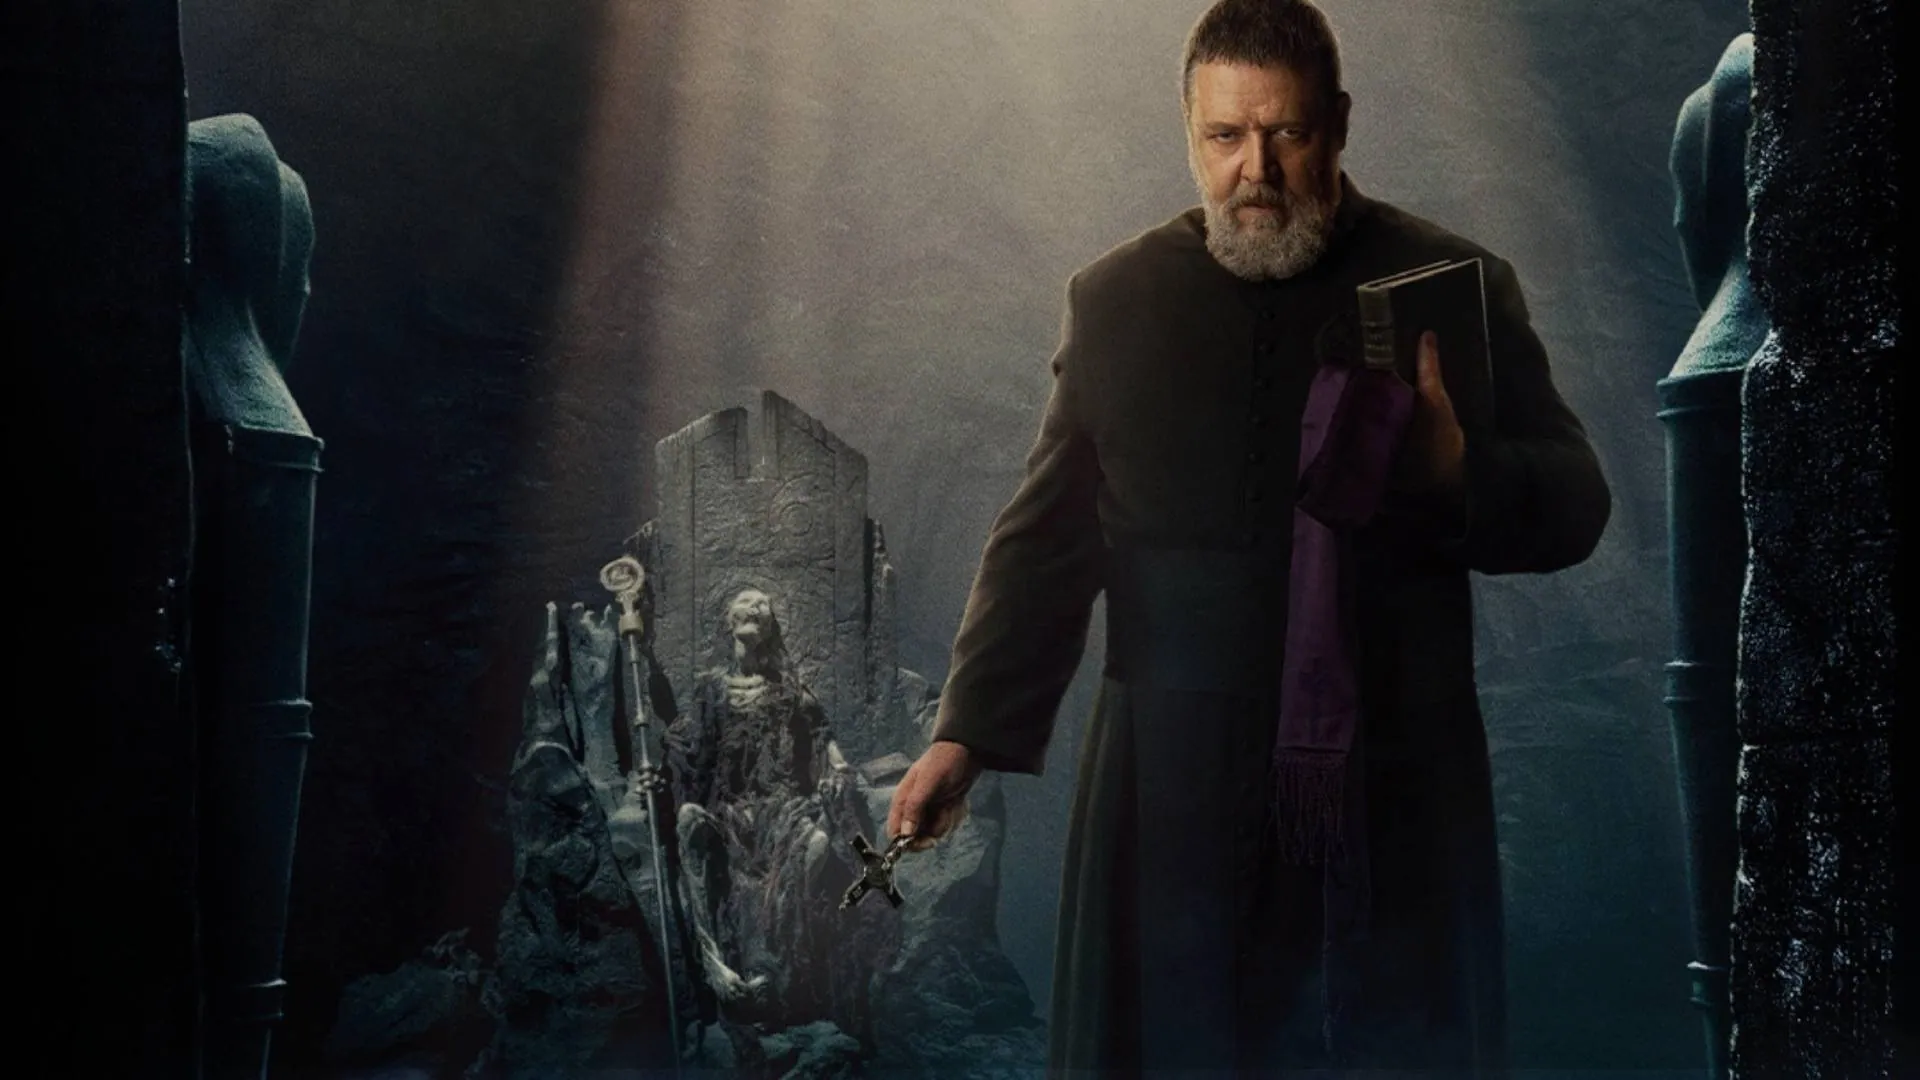 ‘The Pope's Exorcist’ Sequel Confirmed, Russell Crowe to Return